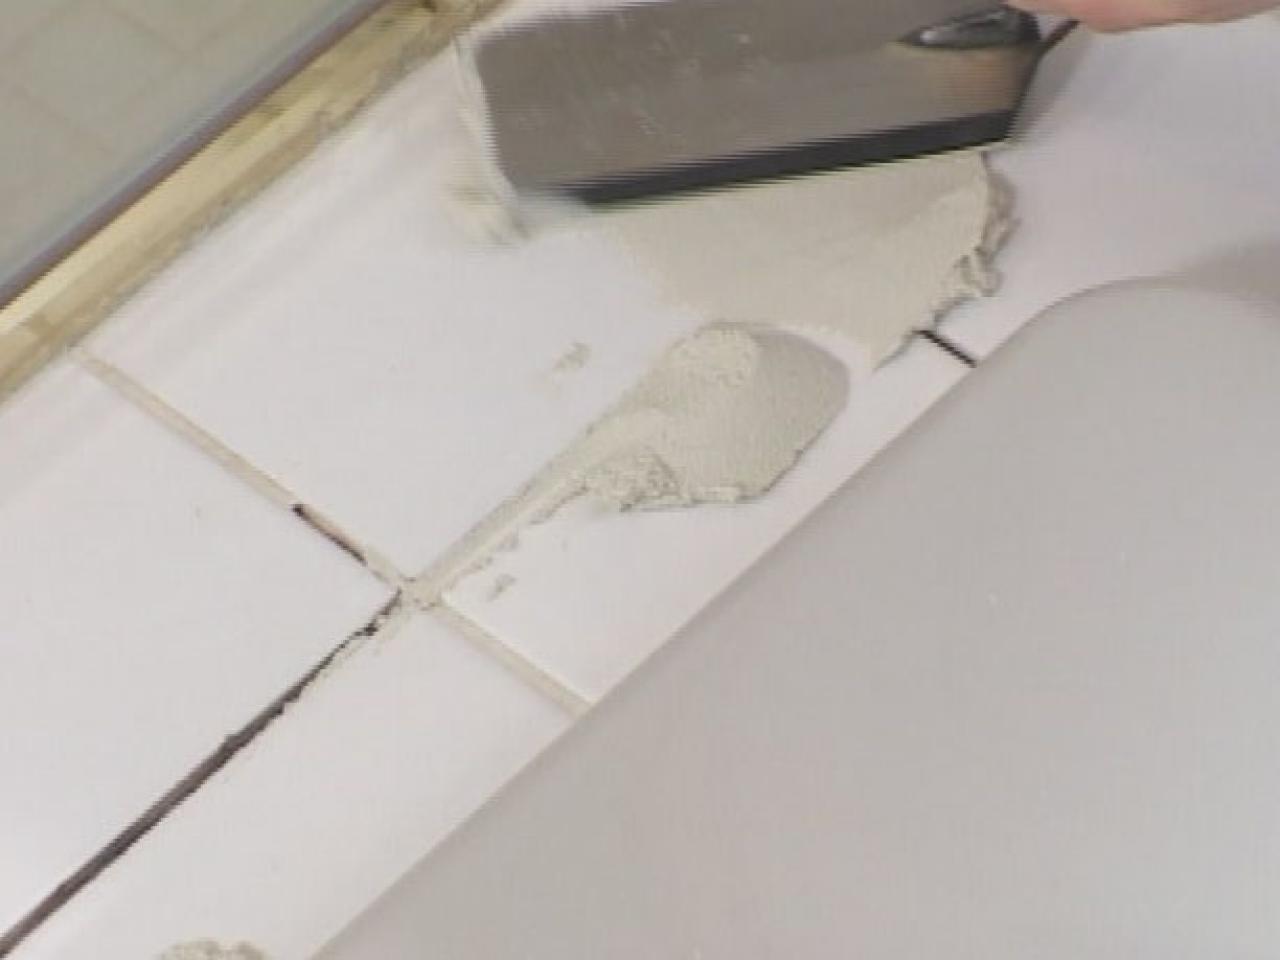 How To Remove And Replace Grout, Remove Tile Grout